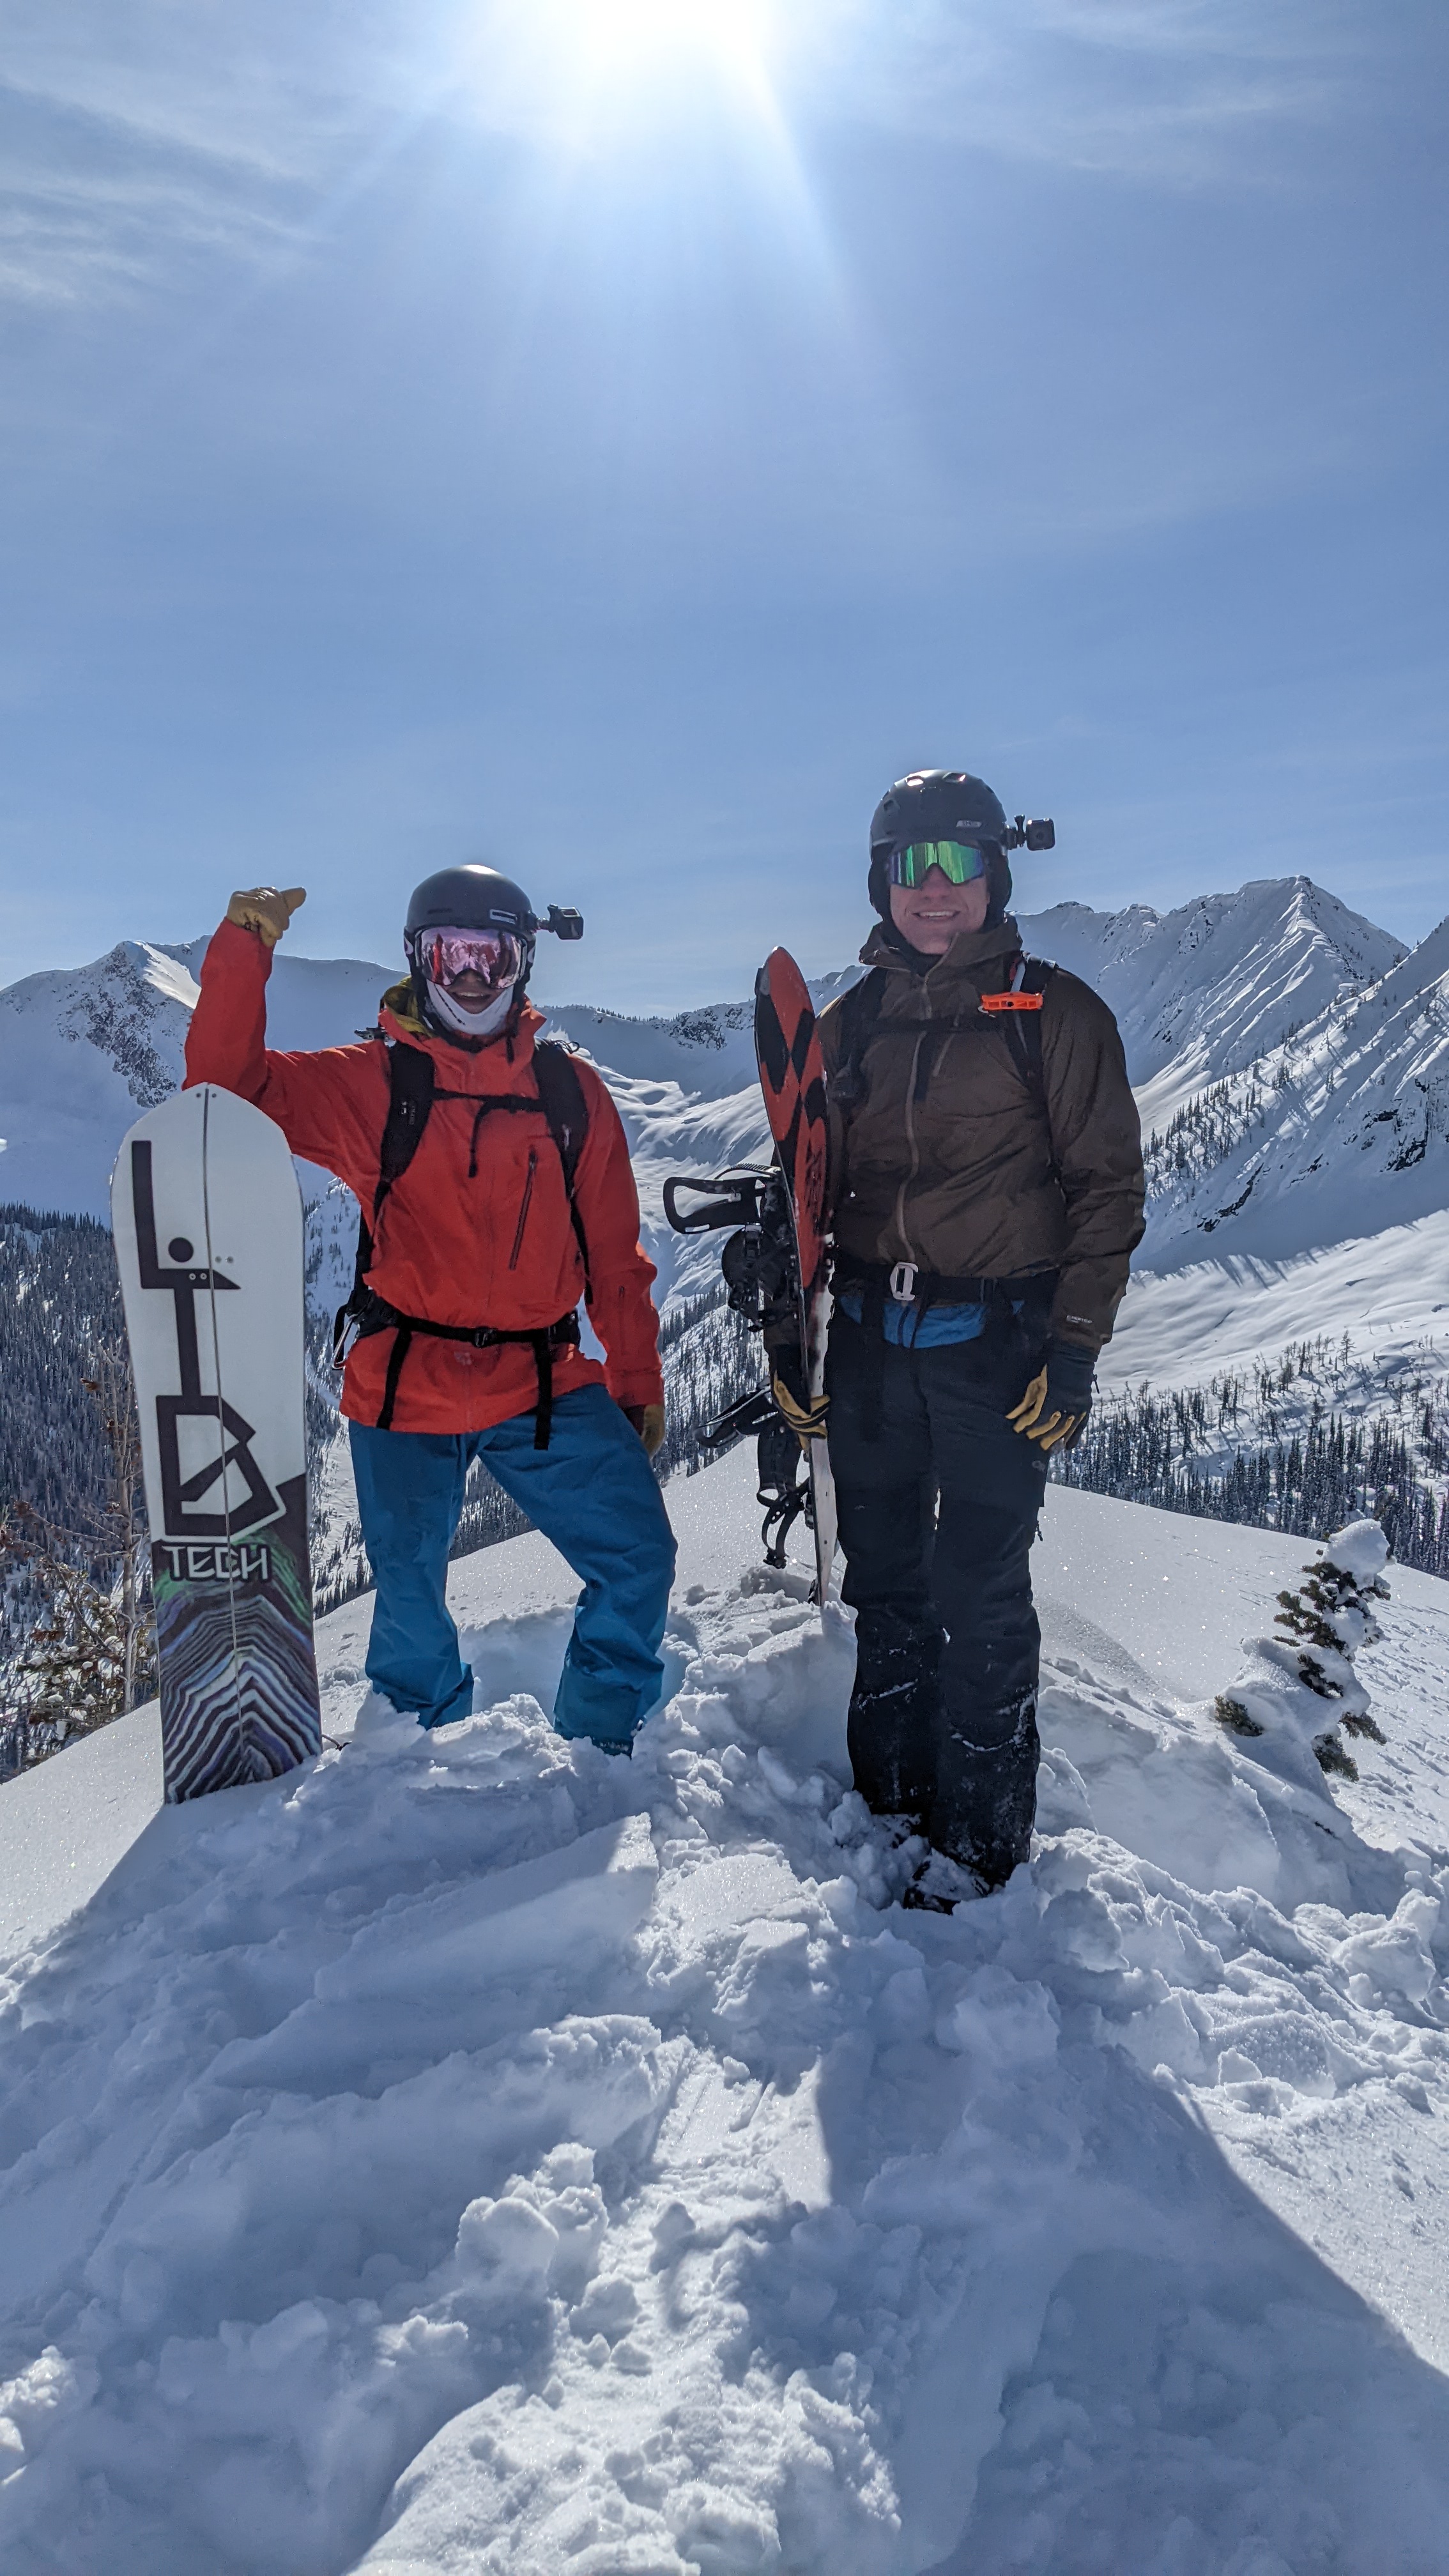 Join me every Friday for a series of articles on backcountry skiing.